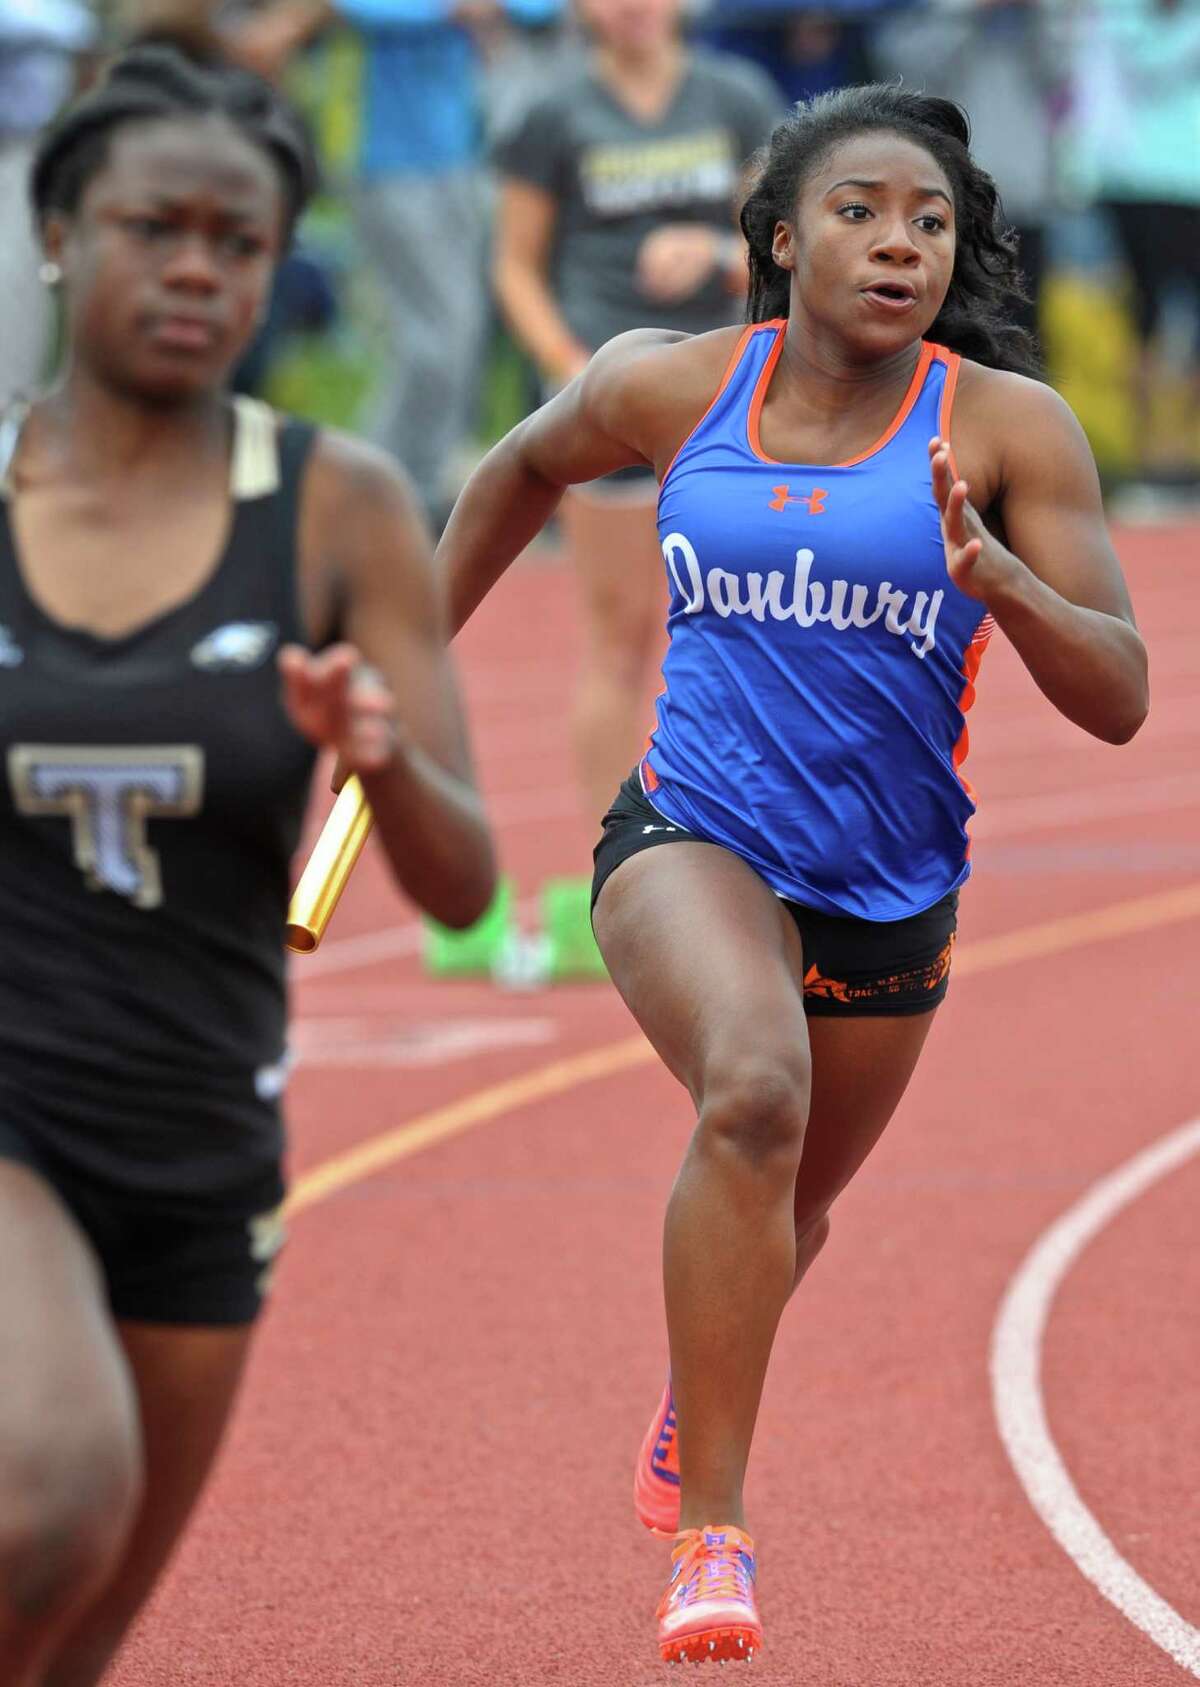 Saintphanie Porcenat runs the first leg of the girls 4x100 meter relay for Danbury during the FCIAC girls track championships, held at Bethel High School, Saturday, May 21, 2016, in Bethel, Conn.